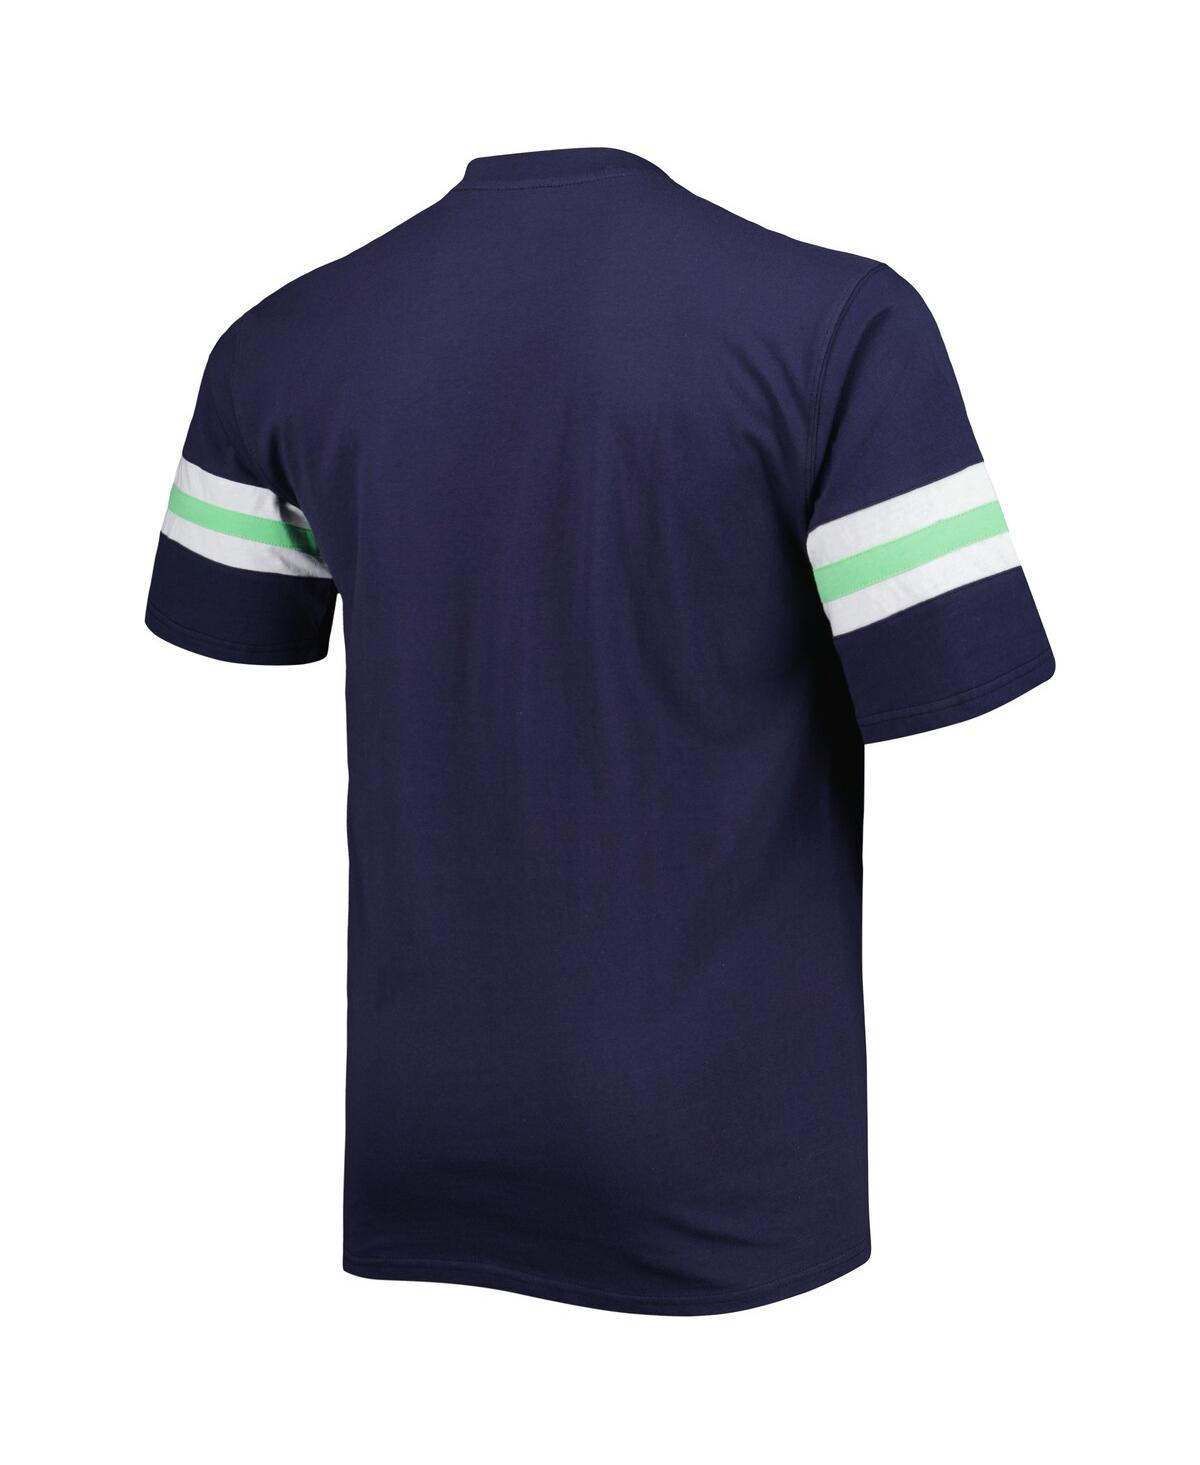 Shop Profile Men's College Navy Seattle Seahawks Big And Tall Arm Stripe T-shirt